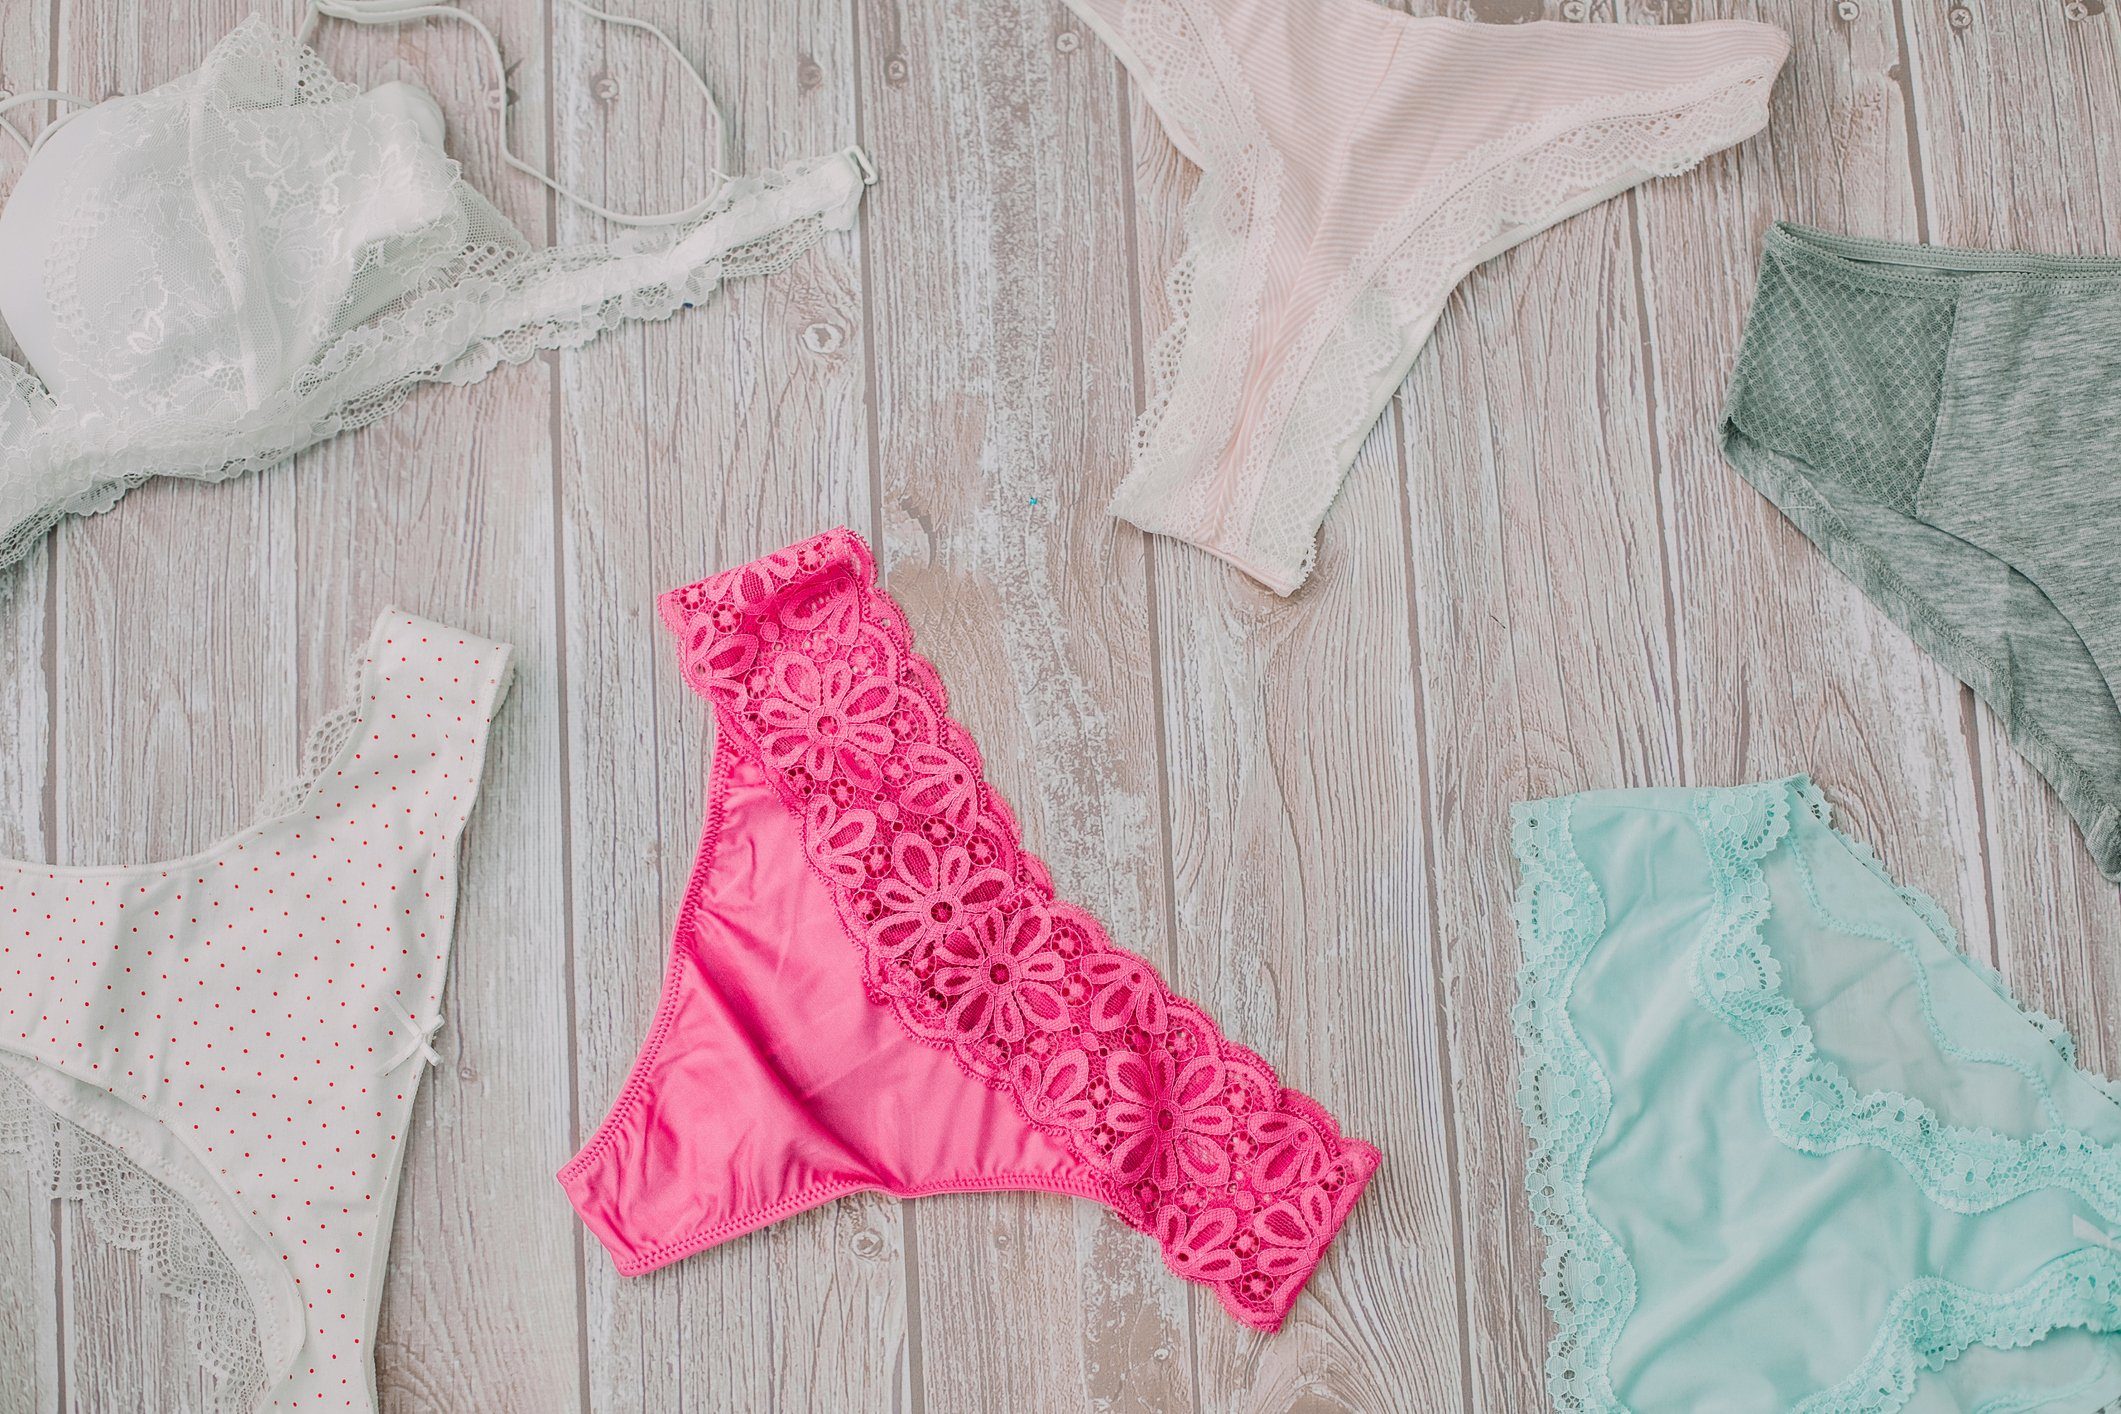 Underwear Mistakes That Can Affect Your Health | Best Health Canada